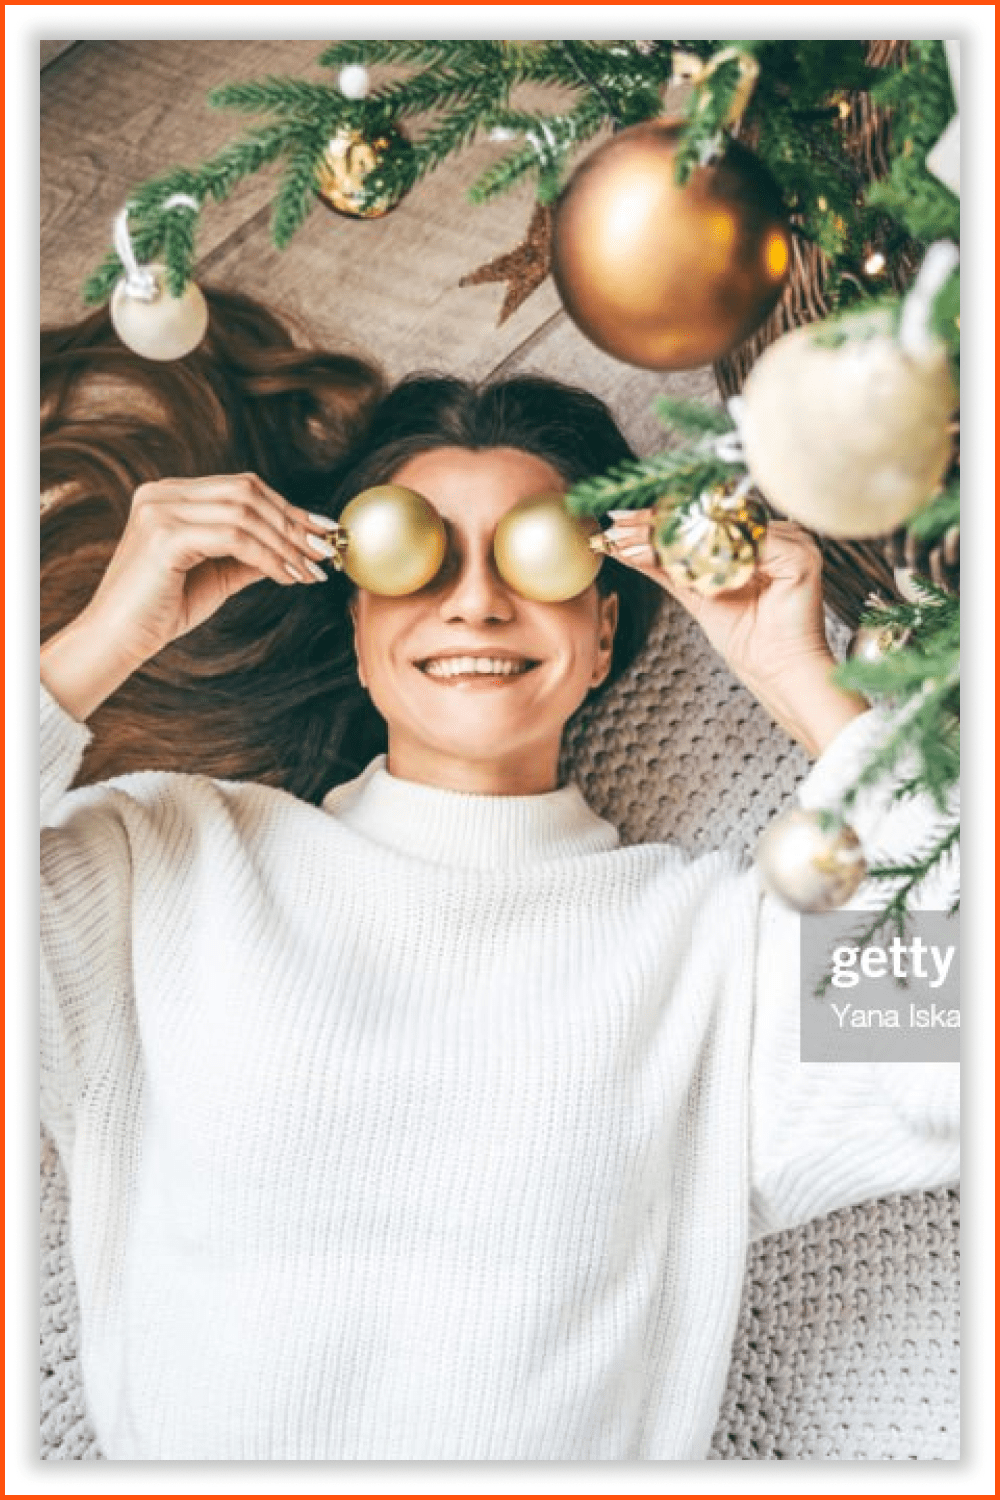 A smiling woman in a white sweater with Christmas toys above her eyes.